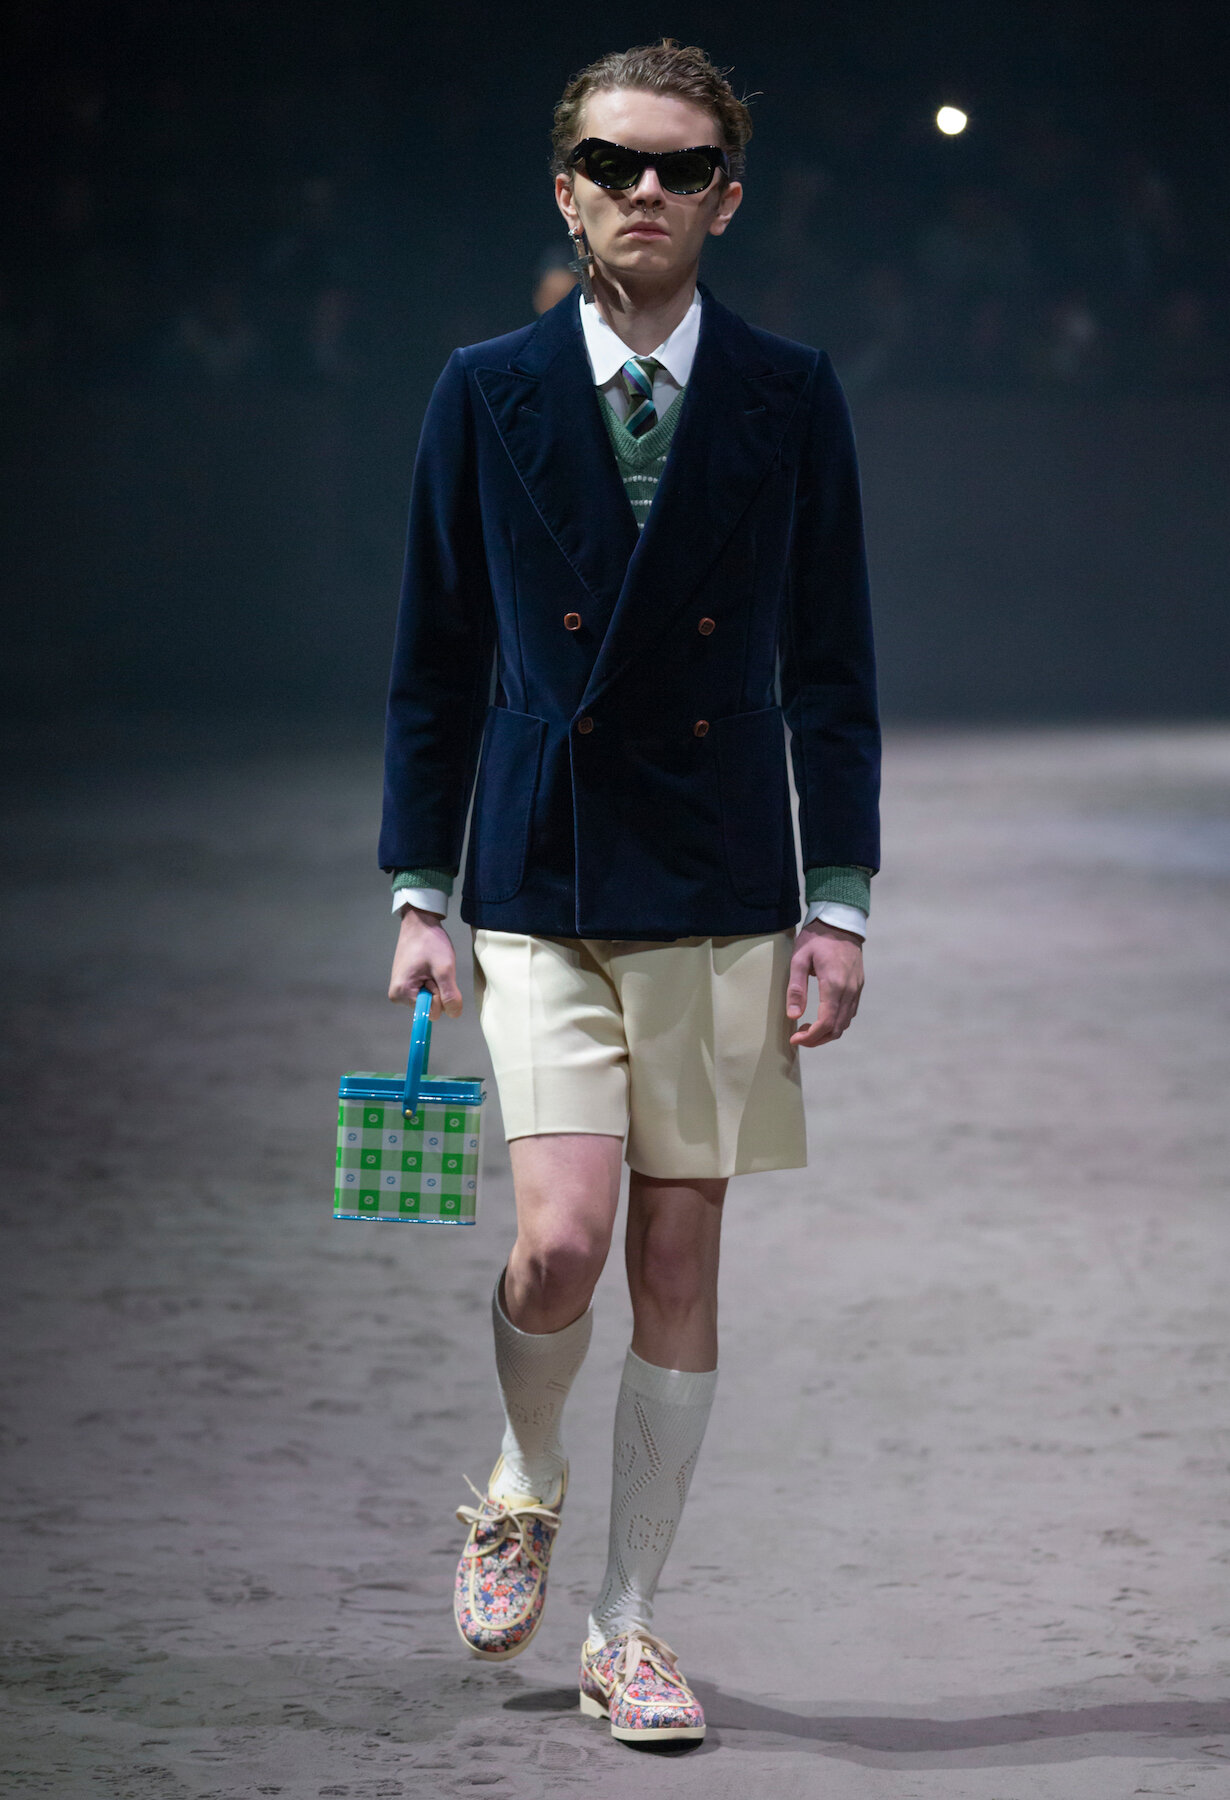 Gucci Fall Winter 2020 Men_s Collection (Look 16).jpg